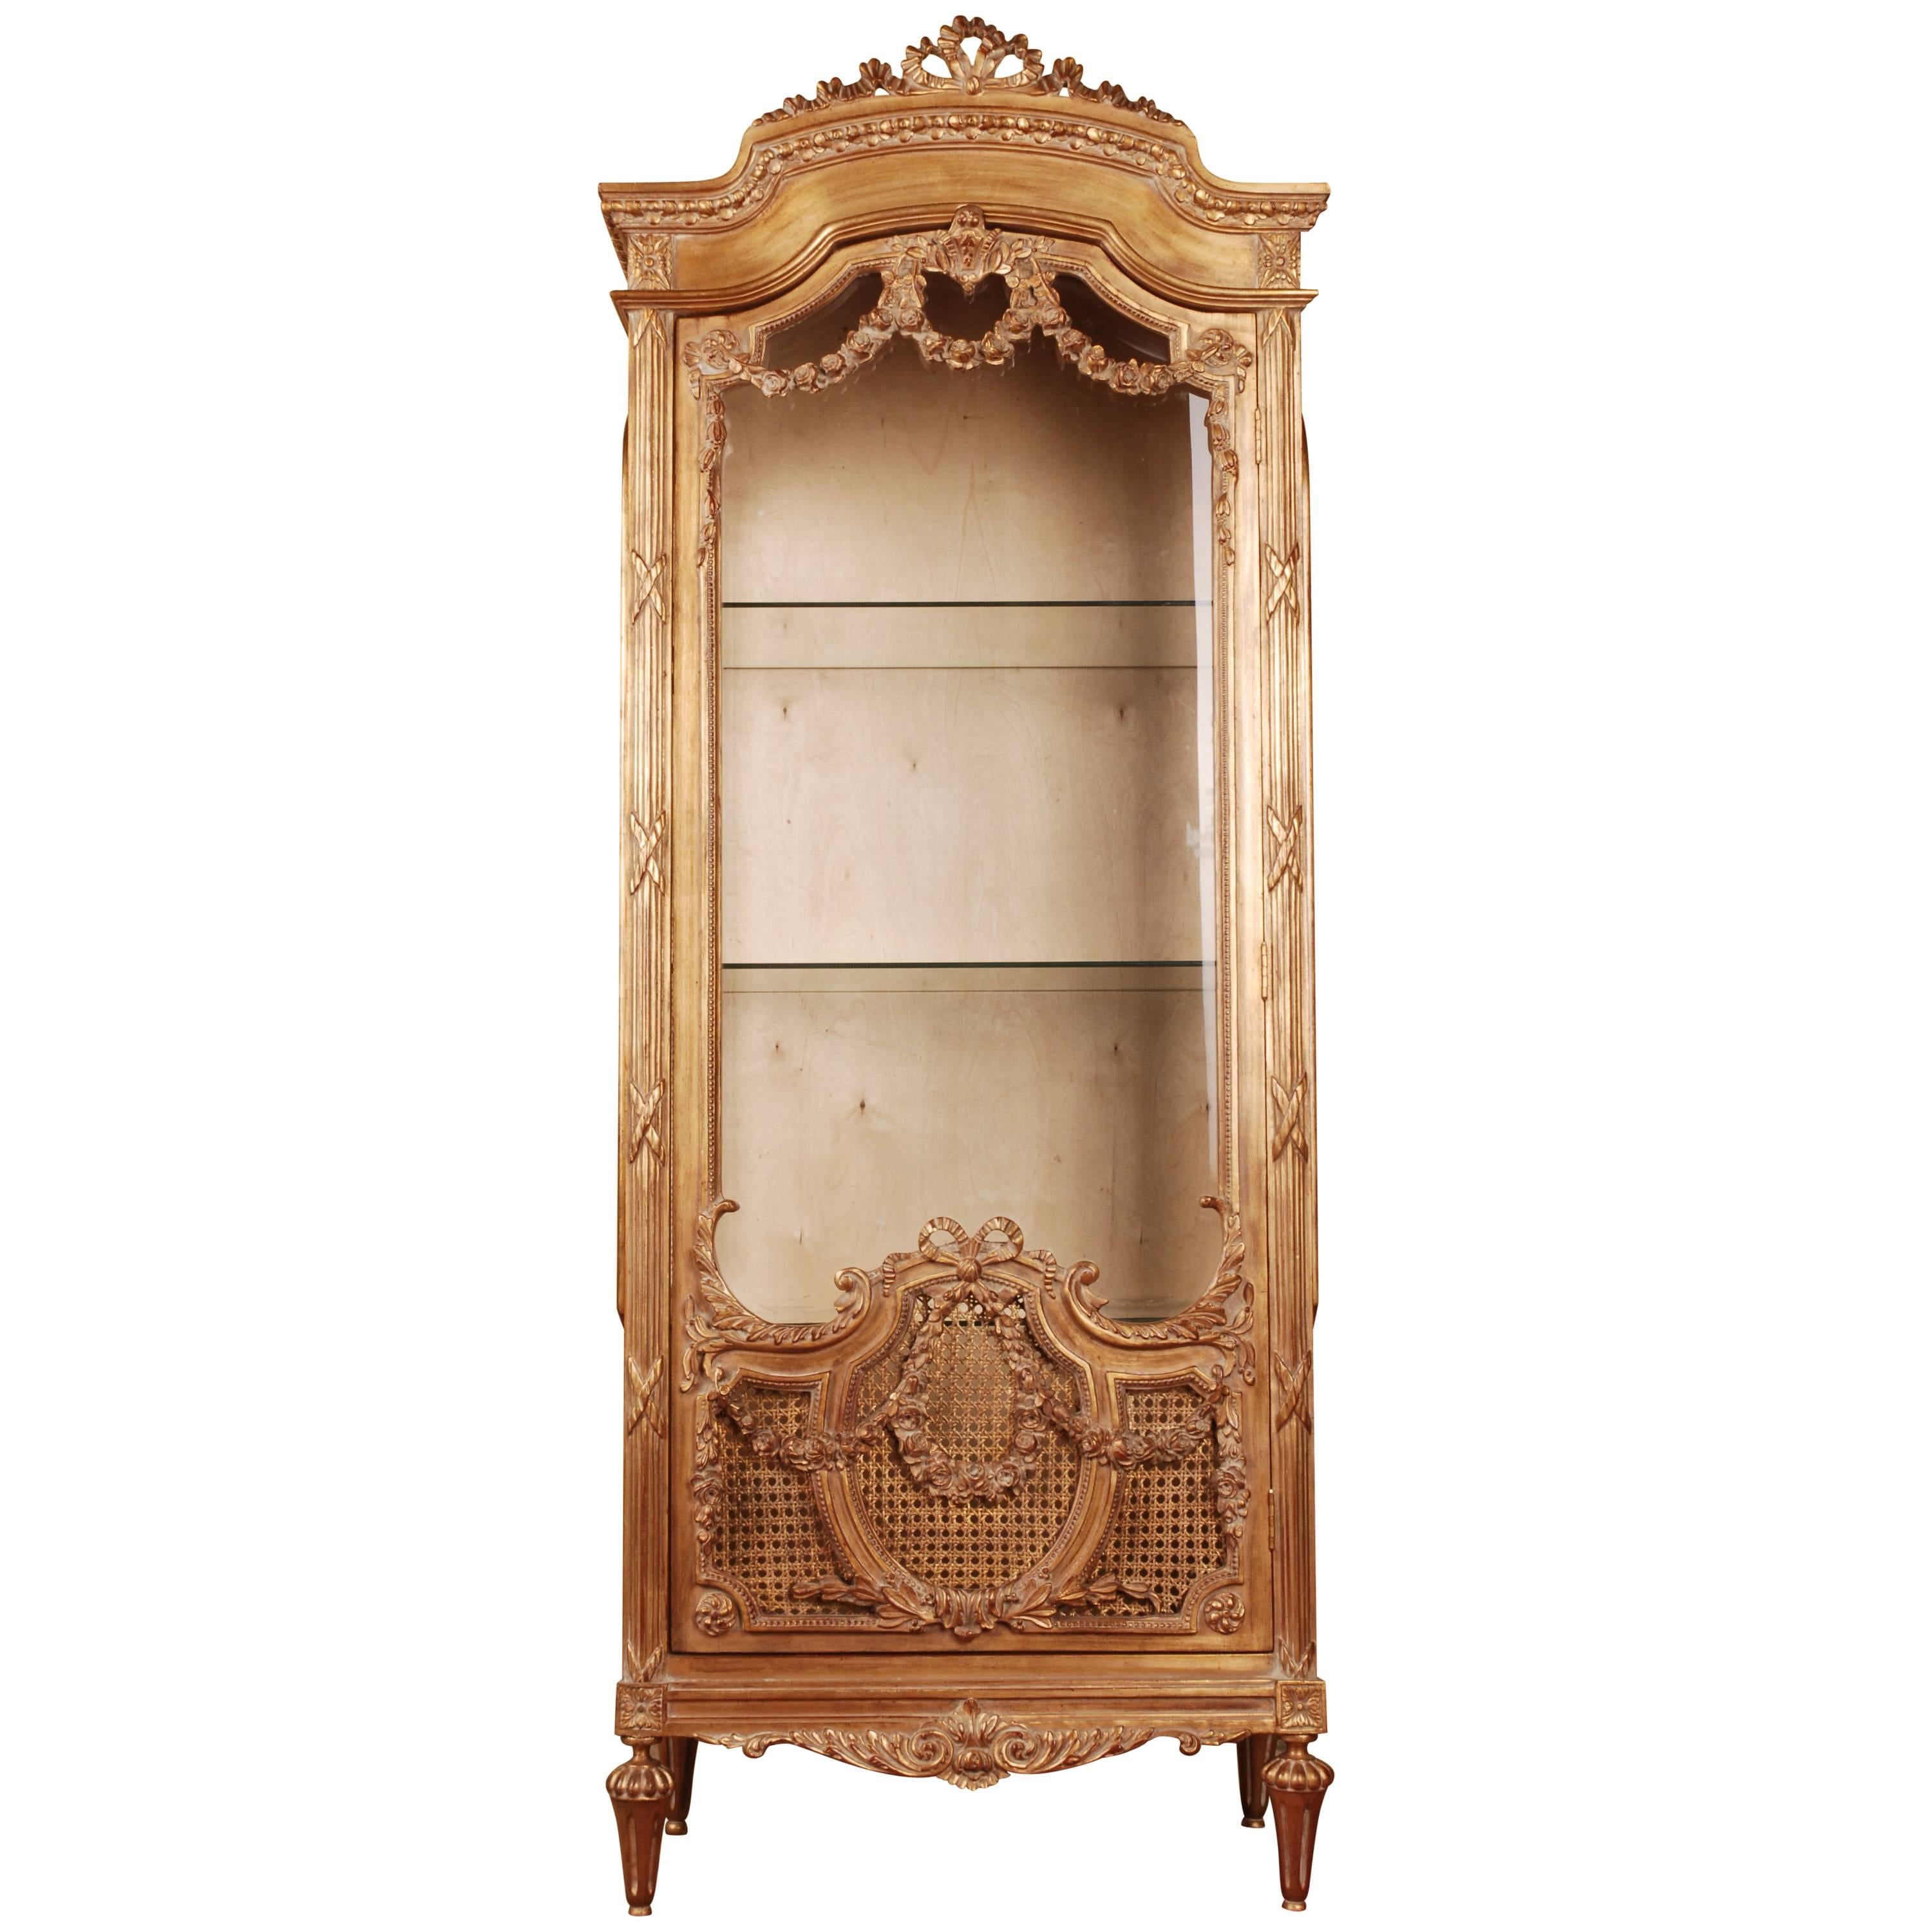 20th Century French Cabinet in the Louis Seize Style